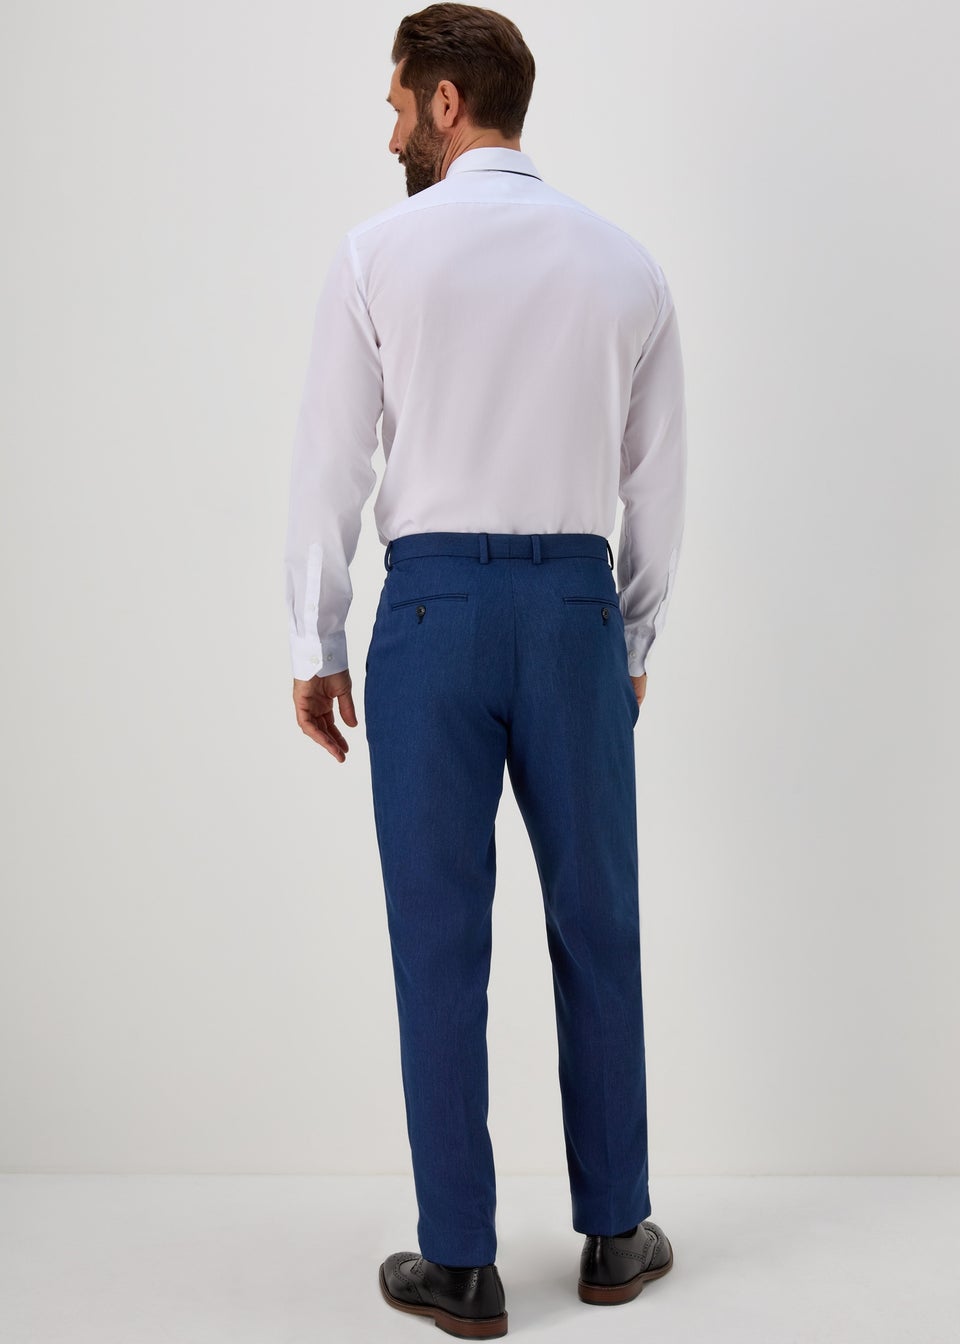 Taylor & Wright Douglas Blue Tailored Fit Suit Trousers